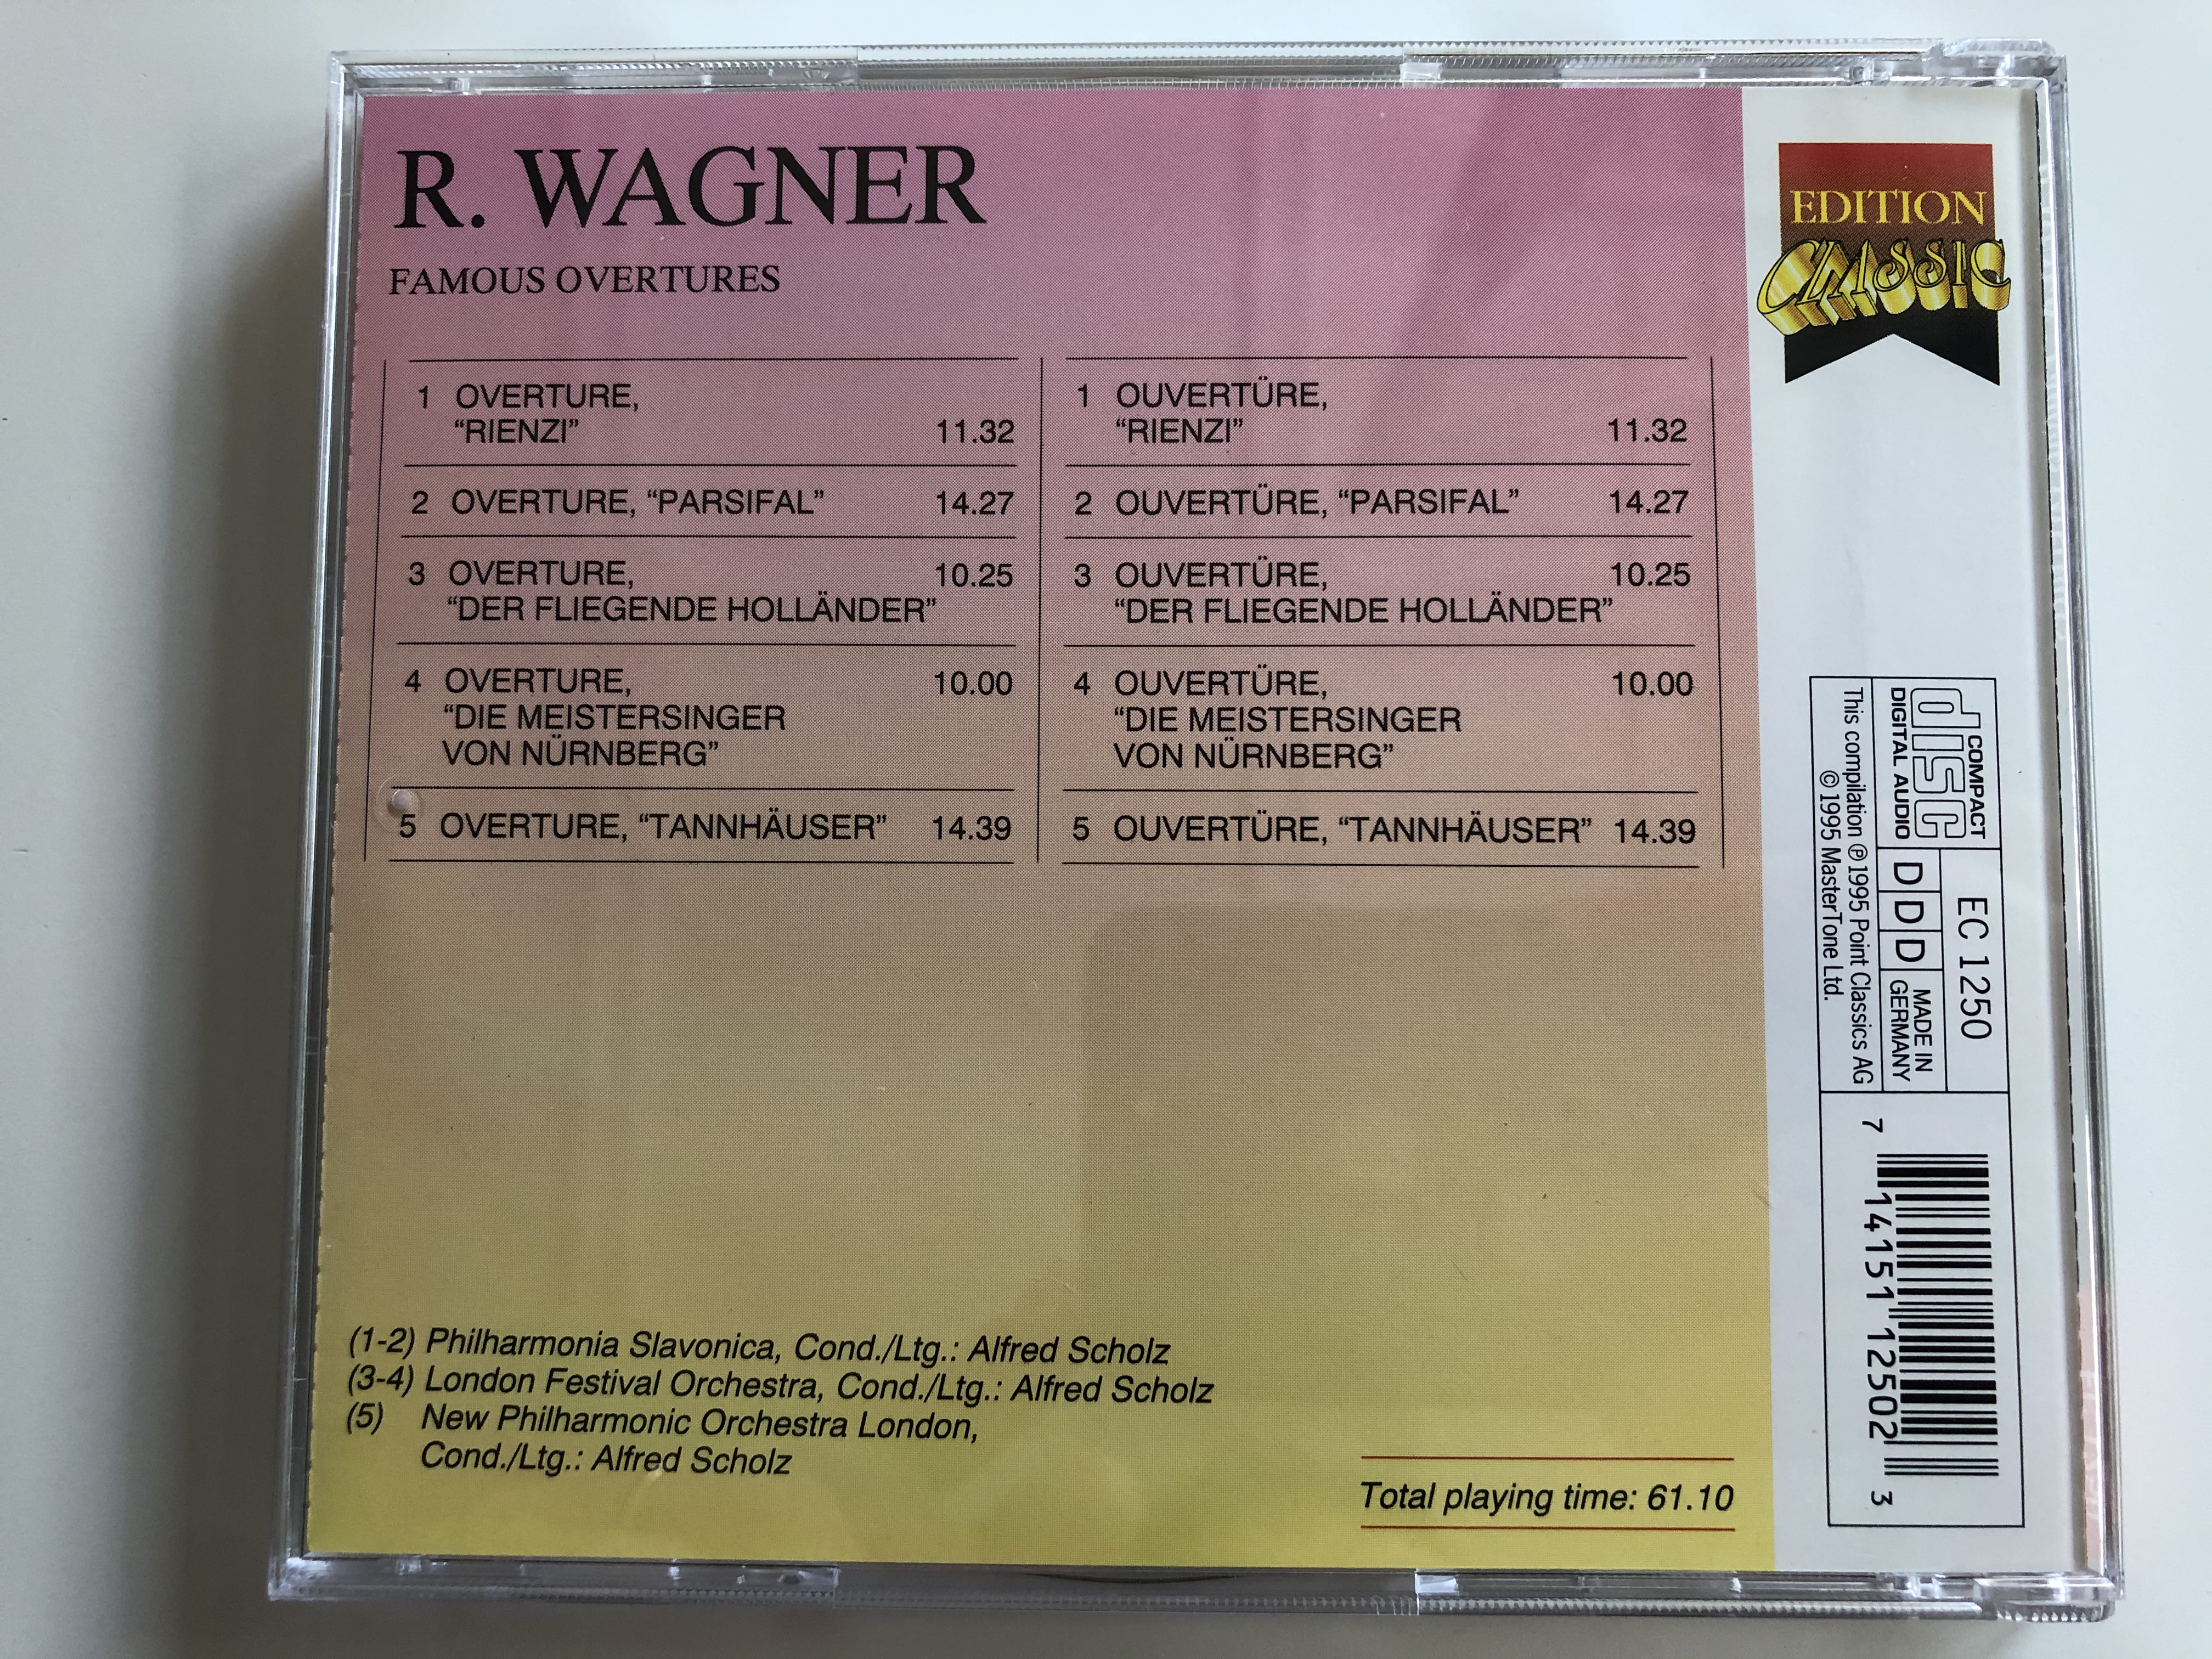 famous-overtures-wagner-edition-classic-audio-cd-1995-ec-1250-3-.jpg